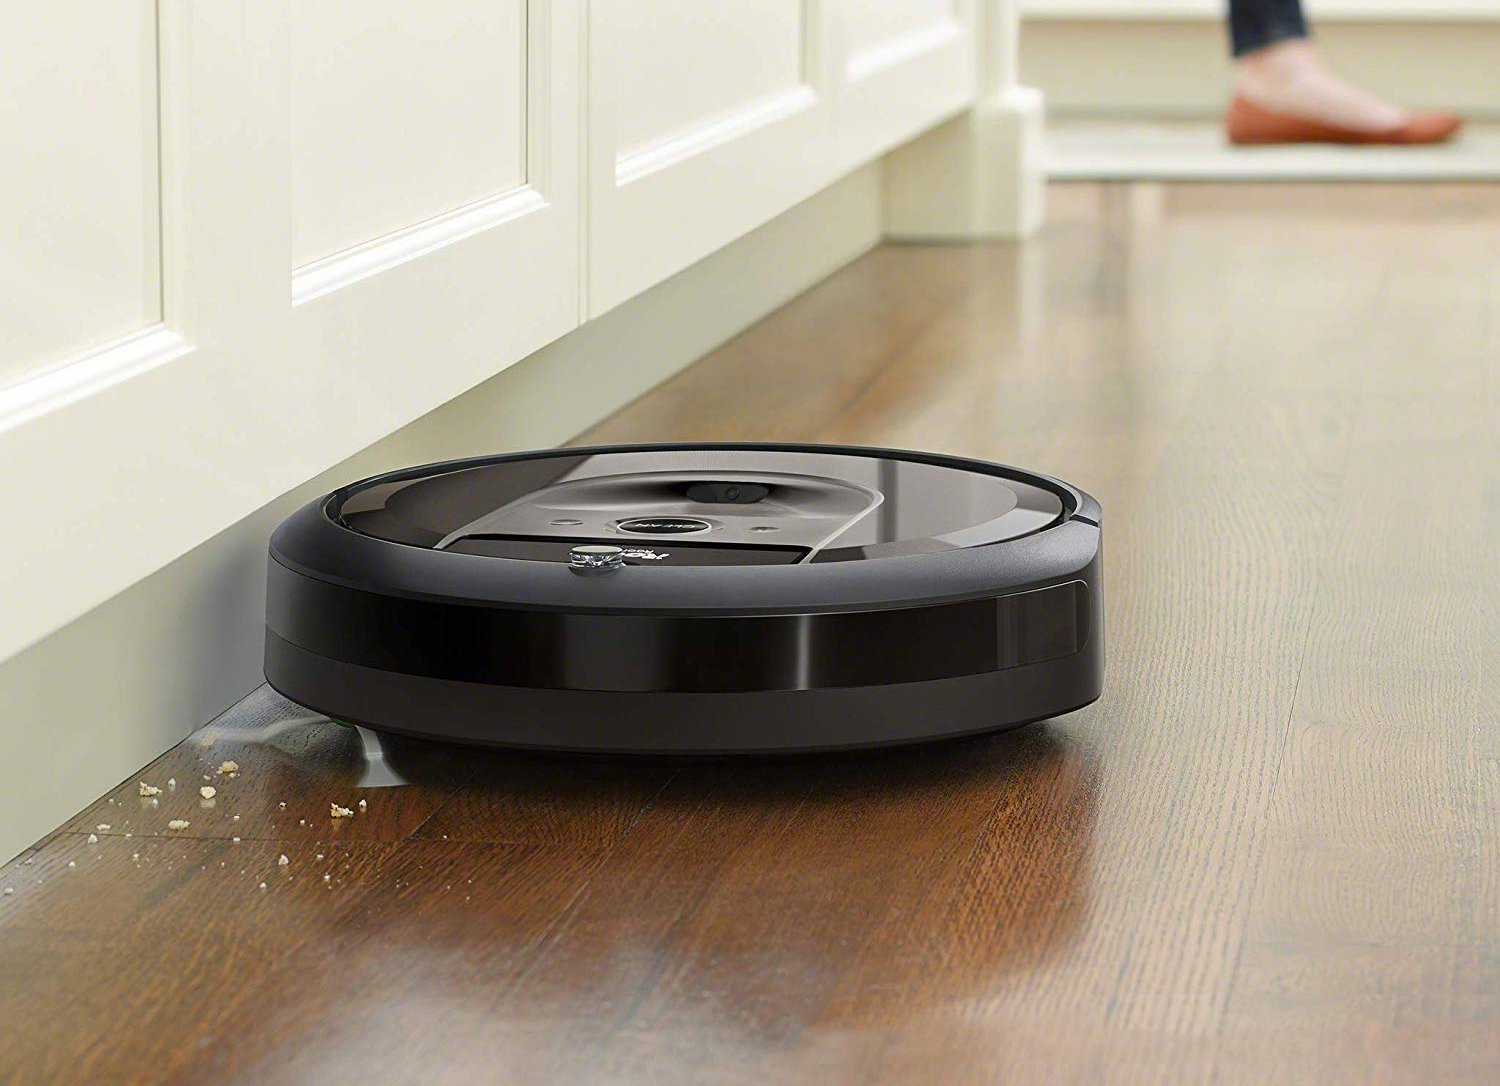 Best Robot Vacuums For Pets 2022, Best Roomba For Pet Hair On Hardwood Floors